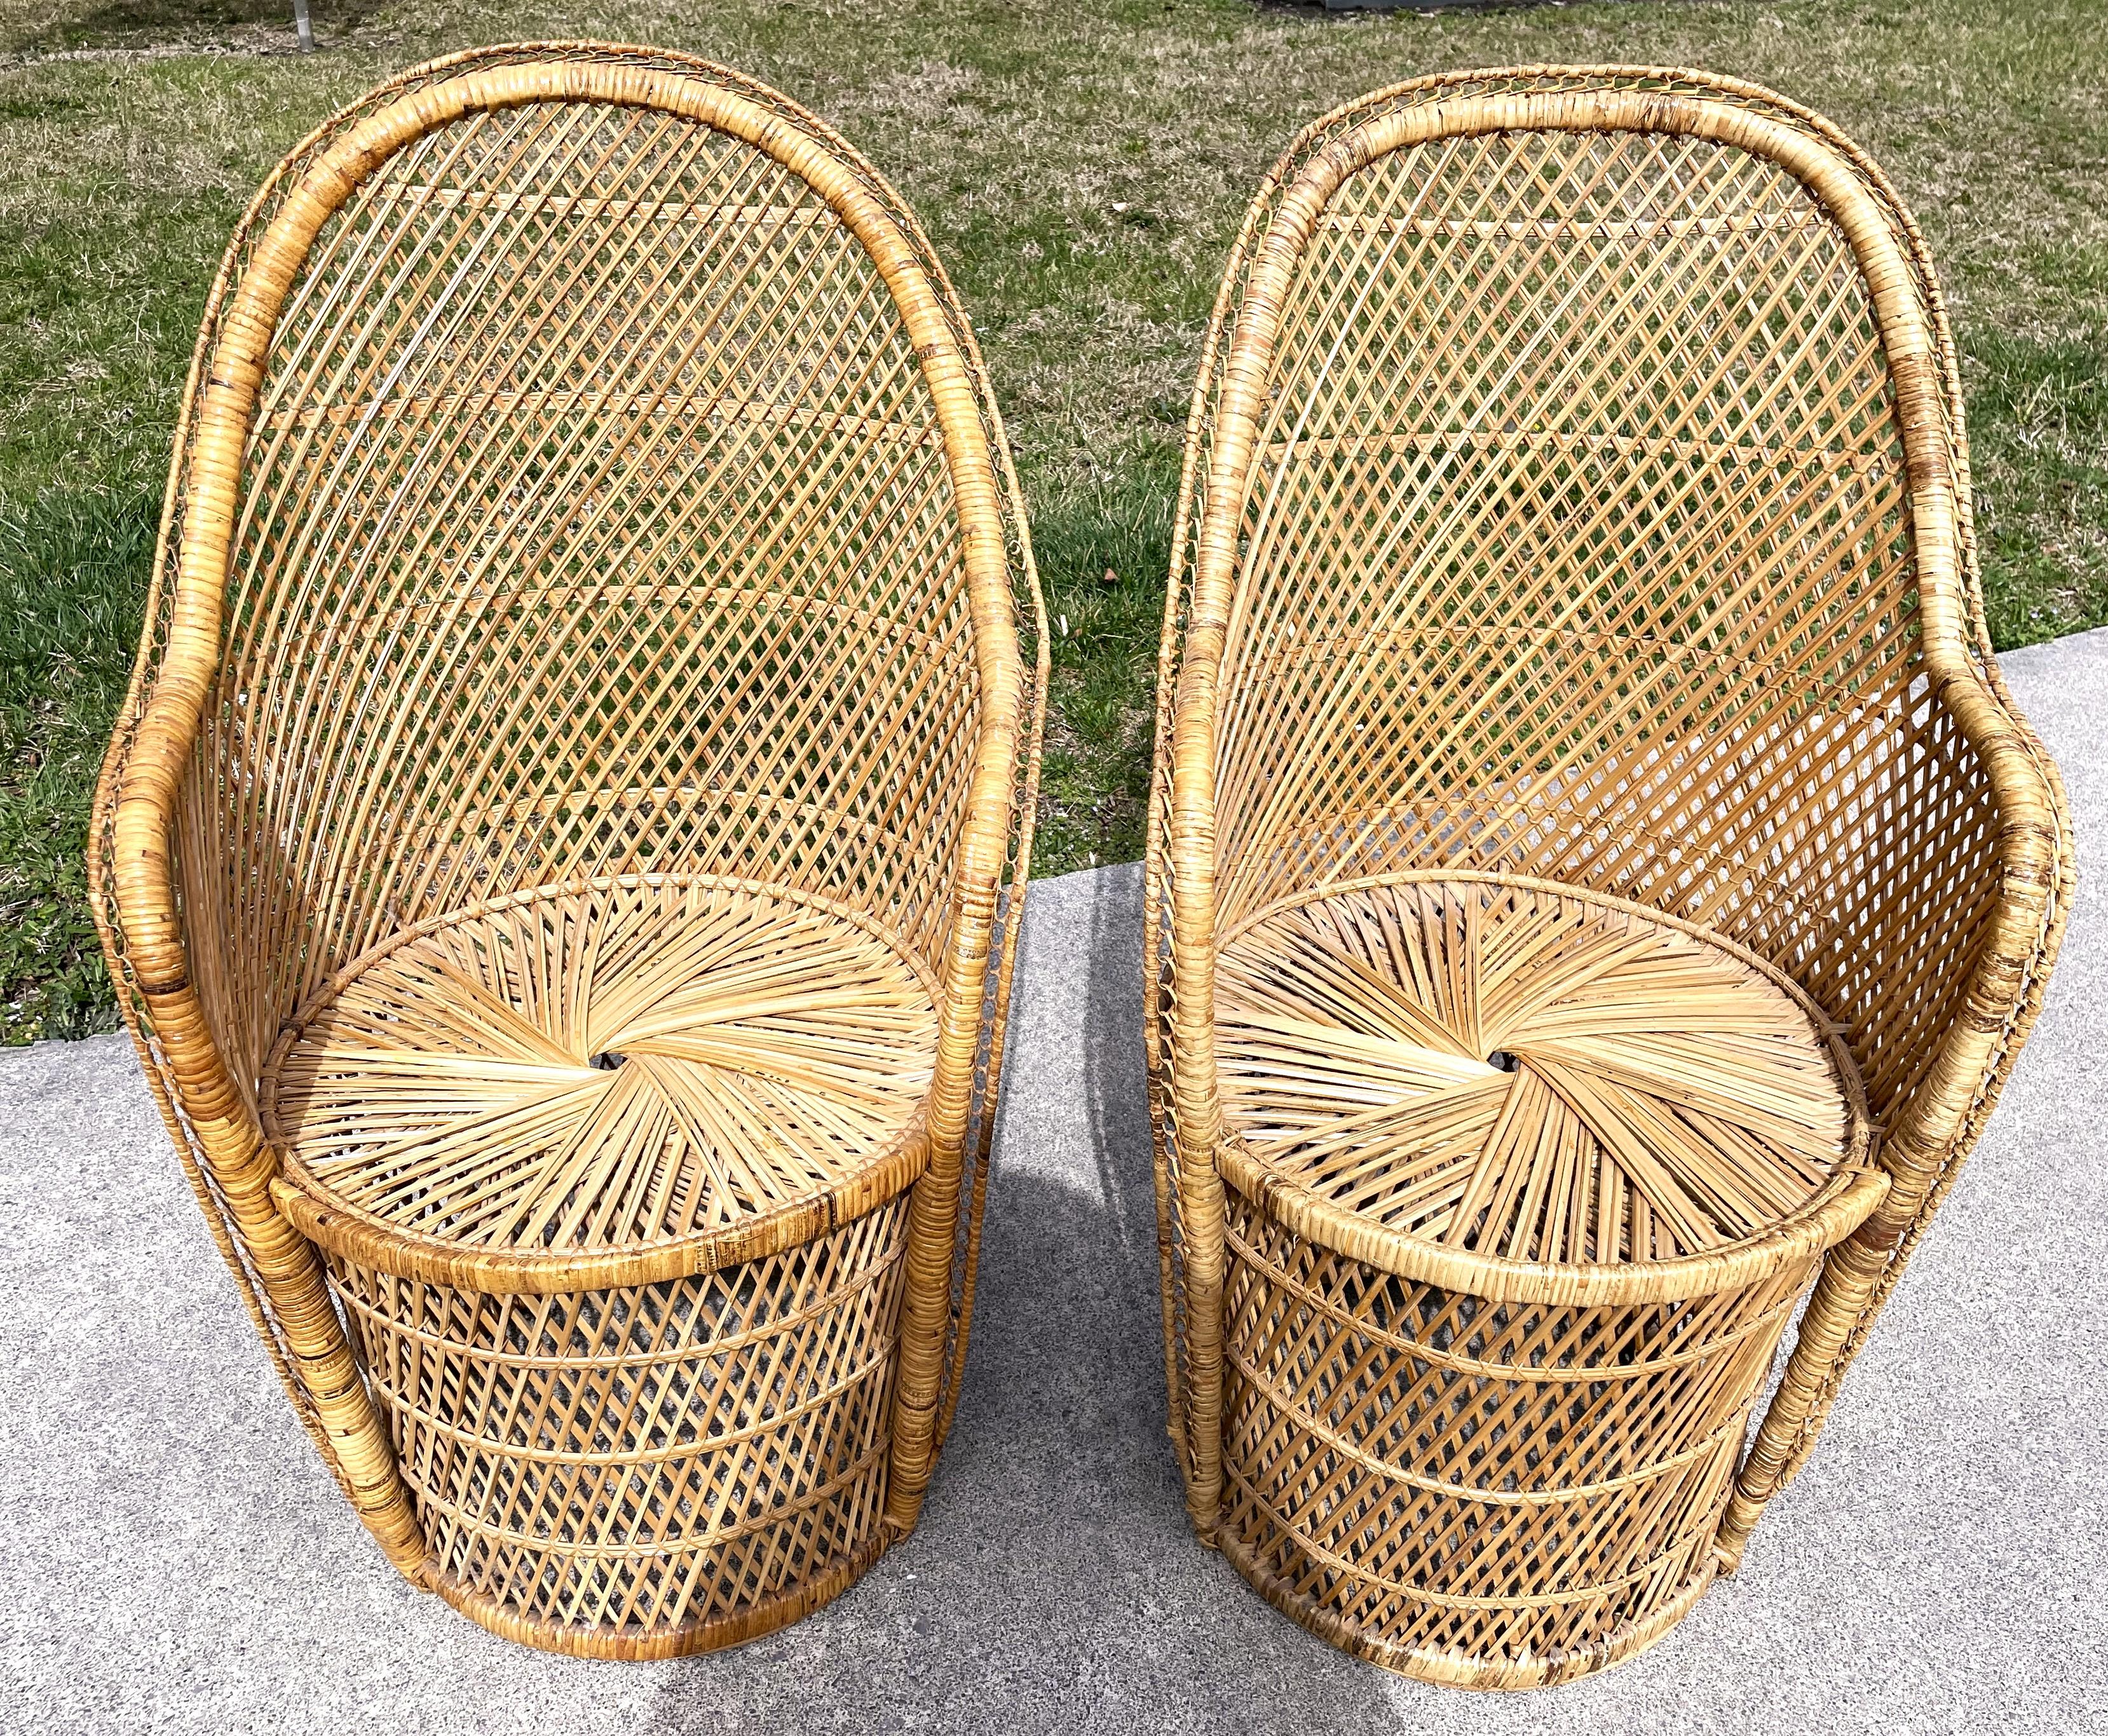 This is a wonderful boho chic pair of rattan chairs with natural wicker woven in a conventional cross hatch pattern. The chair bottoms are round like barrels and the tops are a flared barrel shape. I think these chairs have always been a pair but